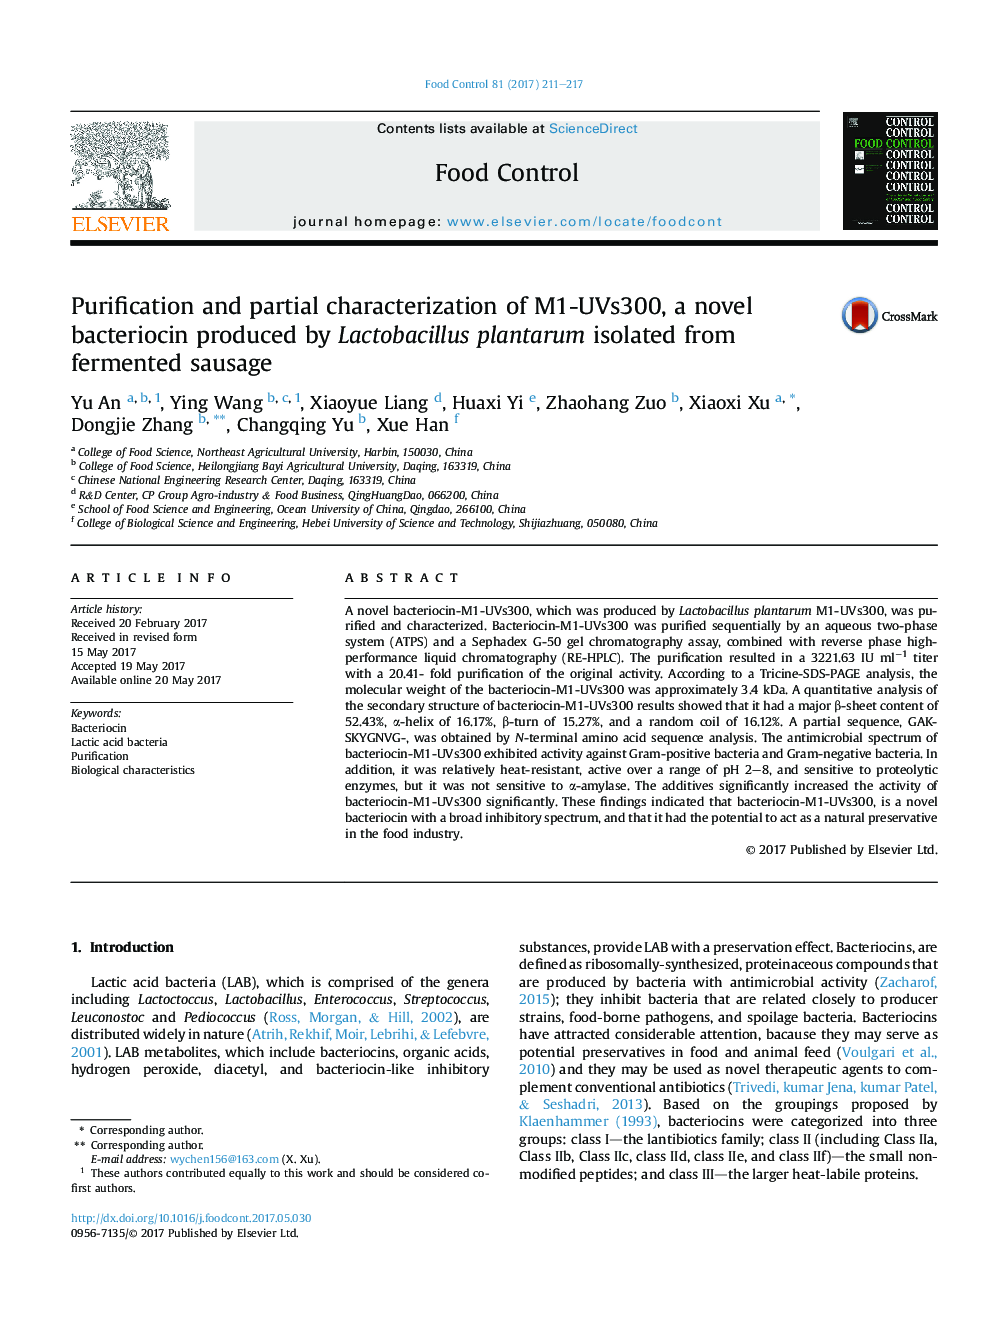 Purification and partial characterization of M1-UVs300, a novel bacteriocin produced by Lactobacillus plantarum isolated from fermented sausage